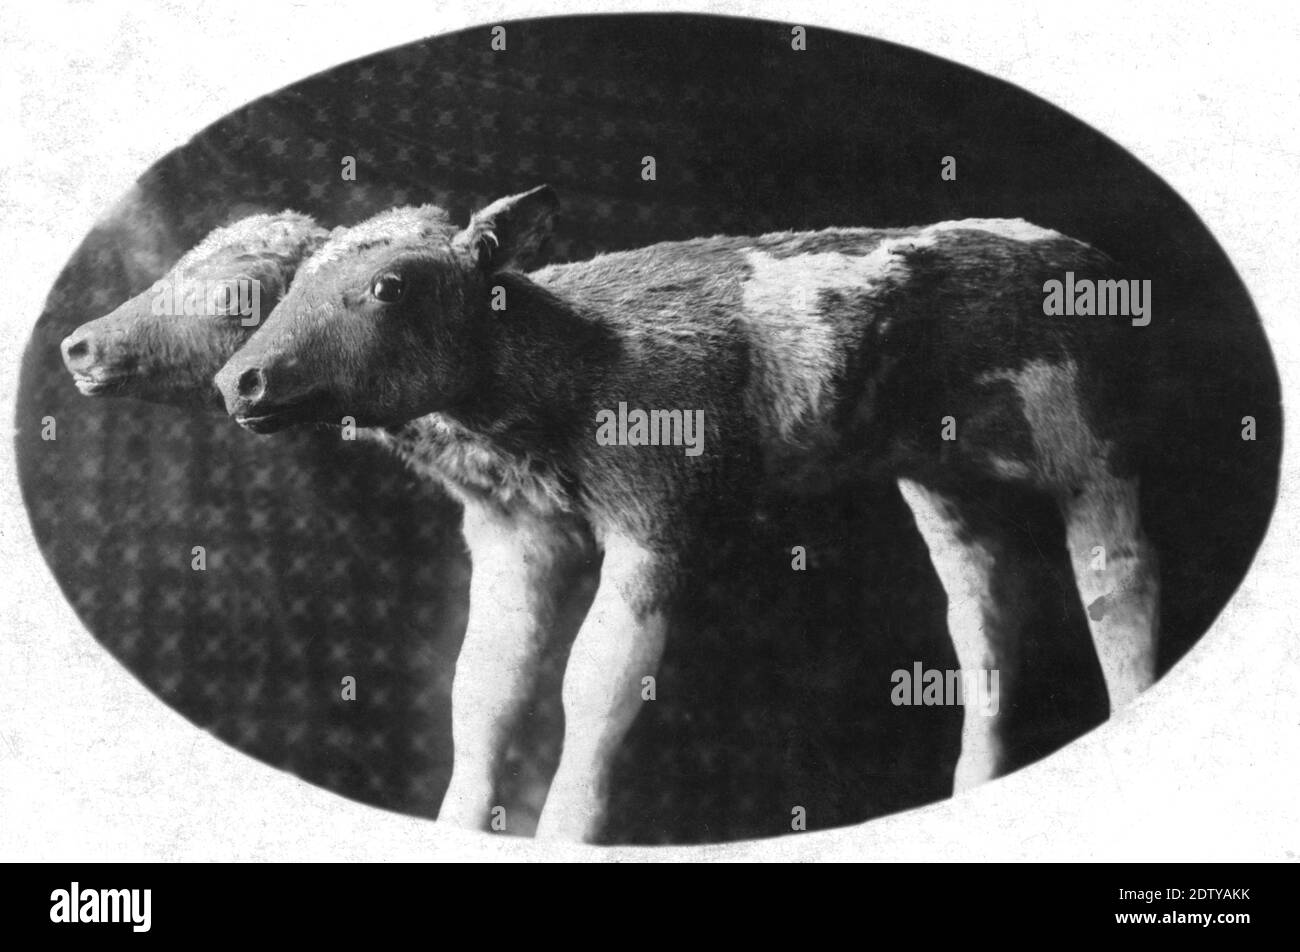 This 2-headed calf was most likely a real animal born of a normal cow.   Abnormal births have always happened, probably within most animal species, throughout history. In the 1800s, and maybe for then, such animals were sometimes stuffed and exhibited by small, traveling circuses and in the sideshows of larger circuses. City folk would have been quite shocked or impressed by such natural curiosities. This circa 1910 photograph would have been sold regularly at any sideshow or circus that had this exhibit.    To see my other circus-related images, Search:  Prestor  vintage  circus Stock Photo